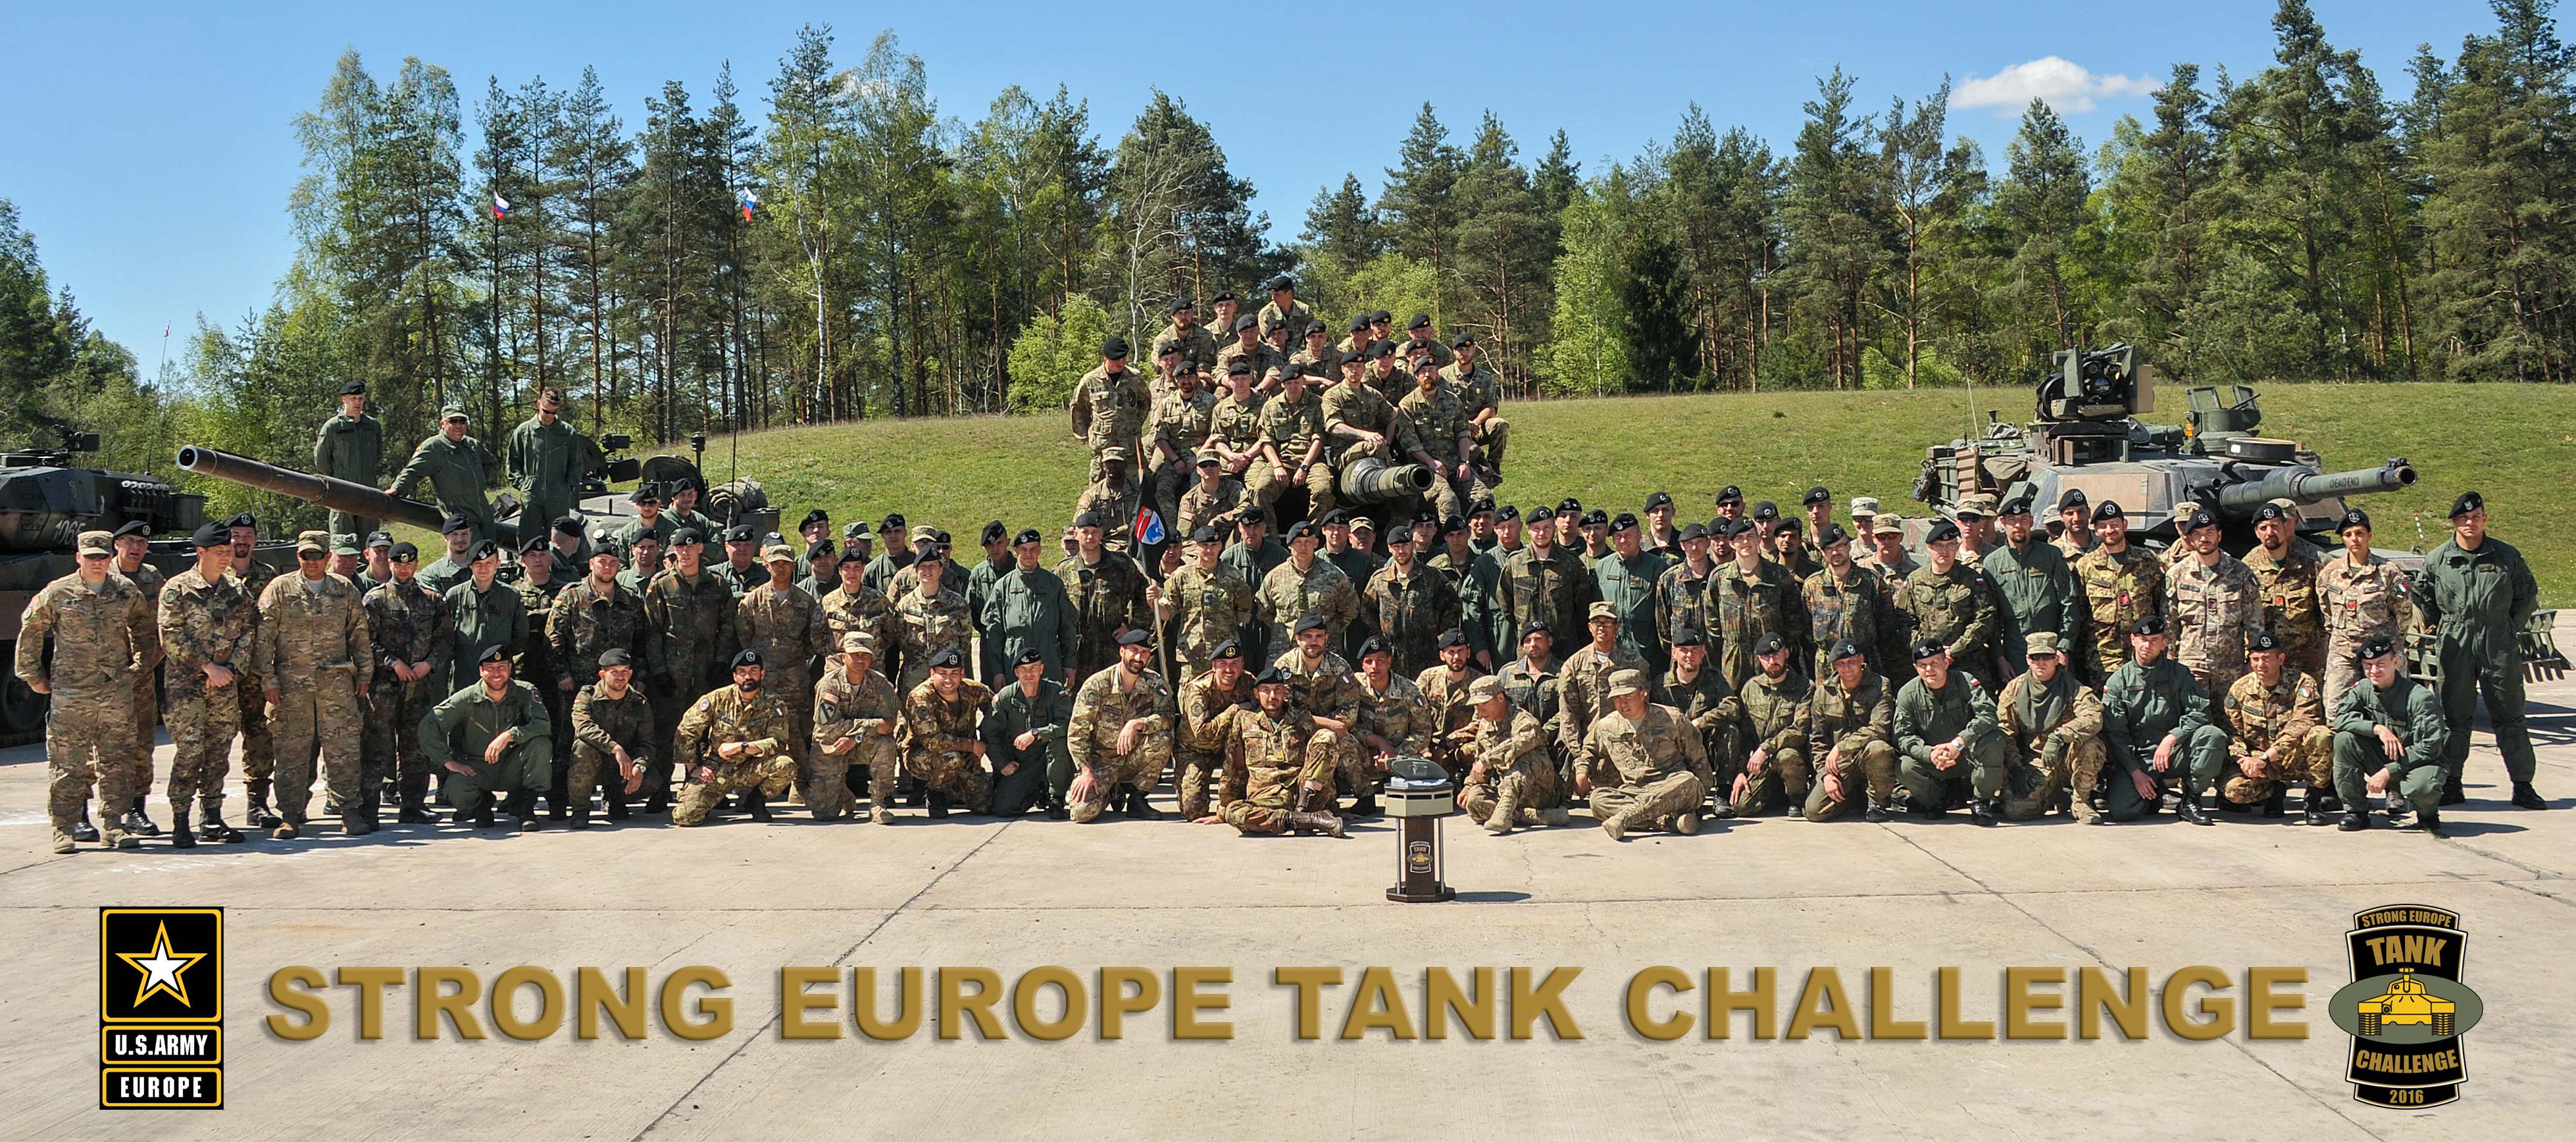 europe tank challenge12 Strong Europe Tank Challenge in Germany